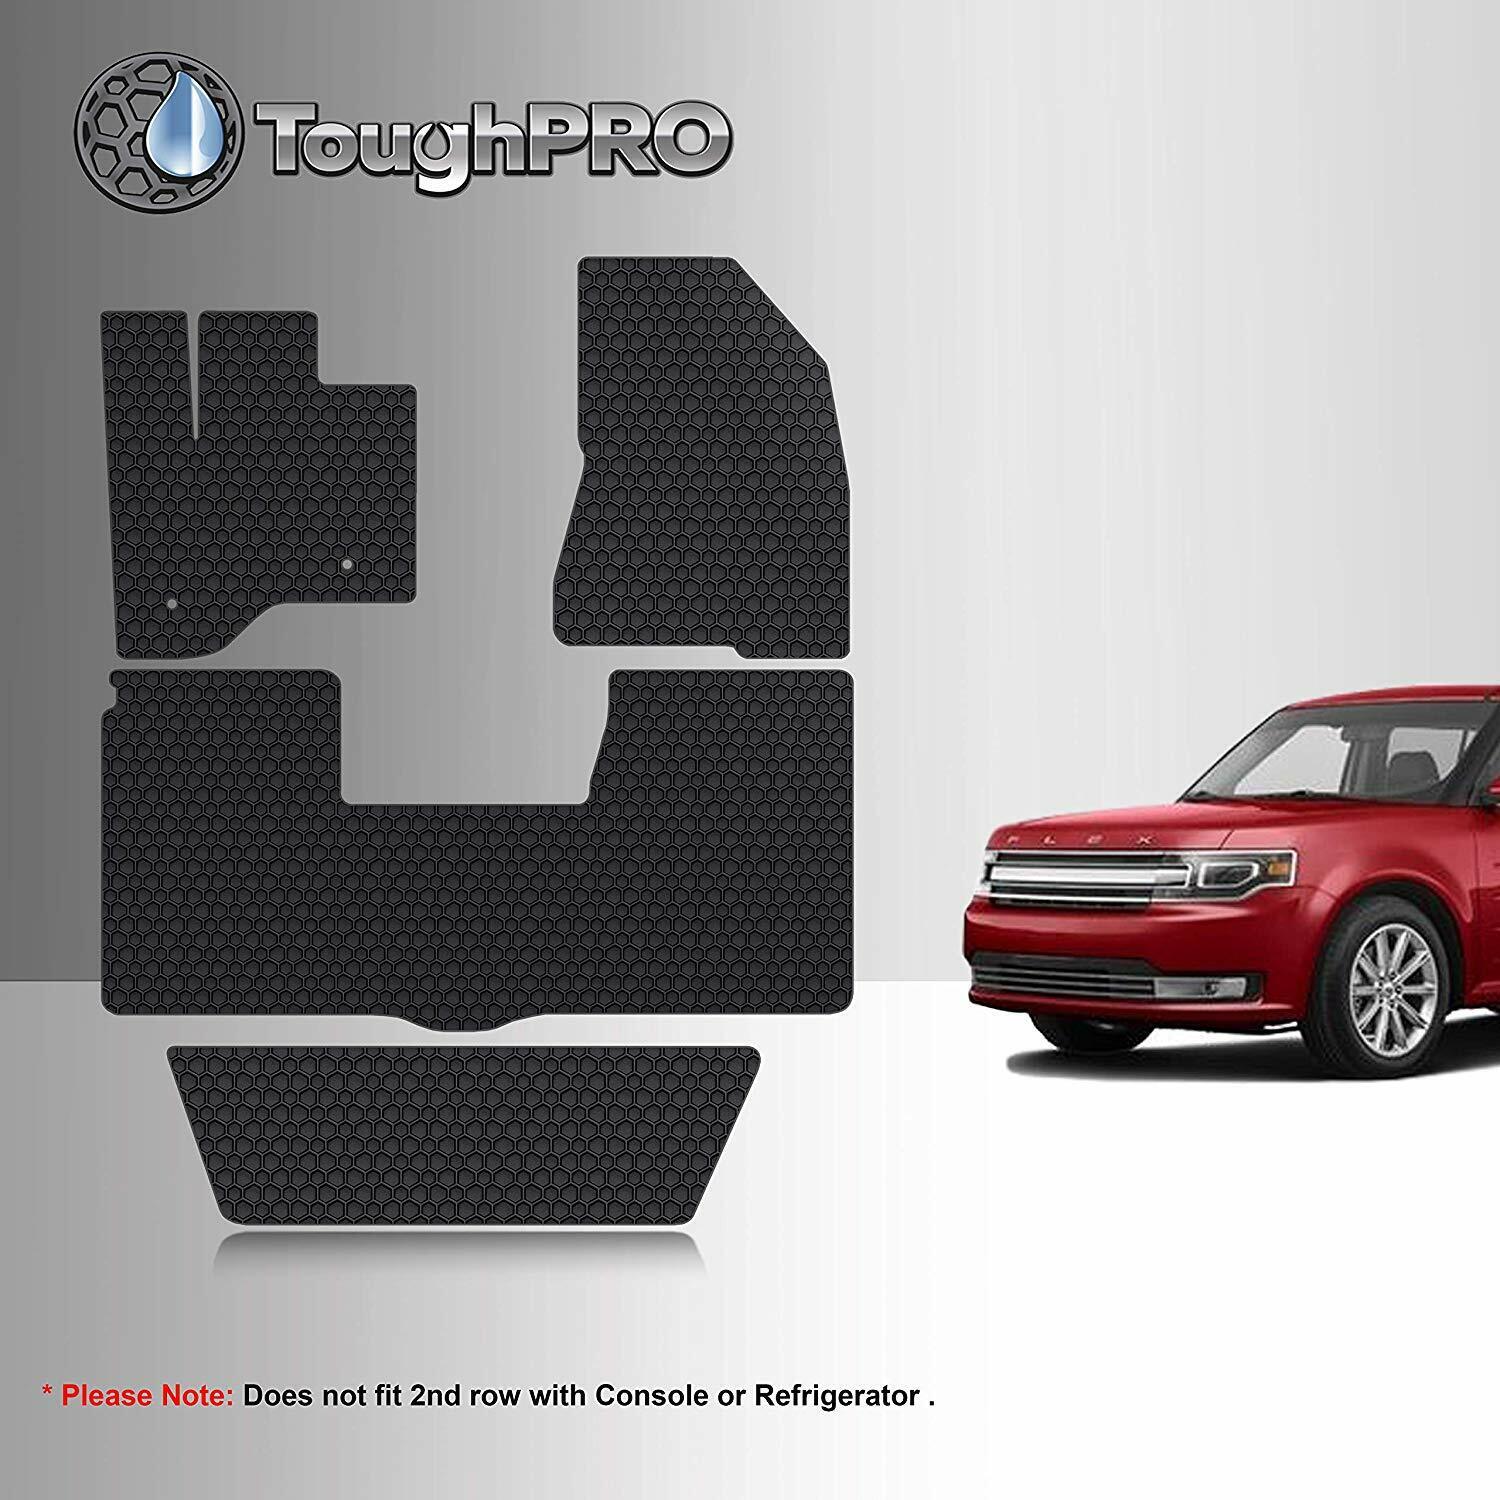 ToughPRO Floor Mats + 3rd Row Black For Ford Flex 2nd Row 2013-2019